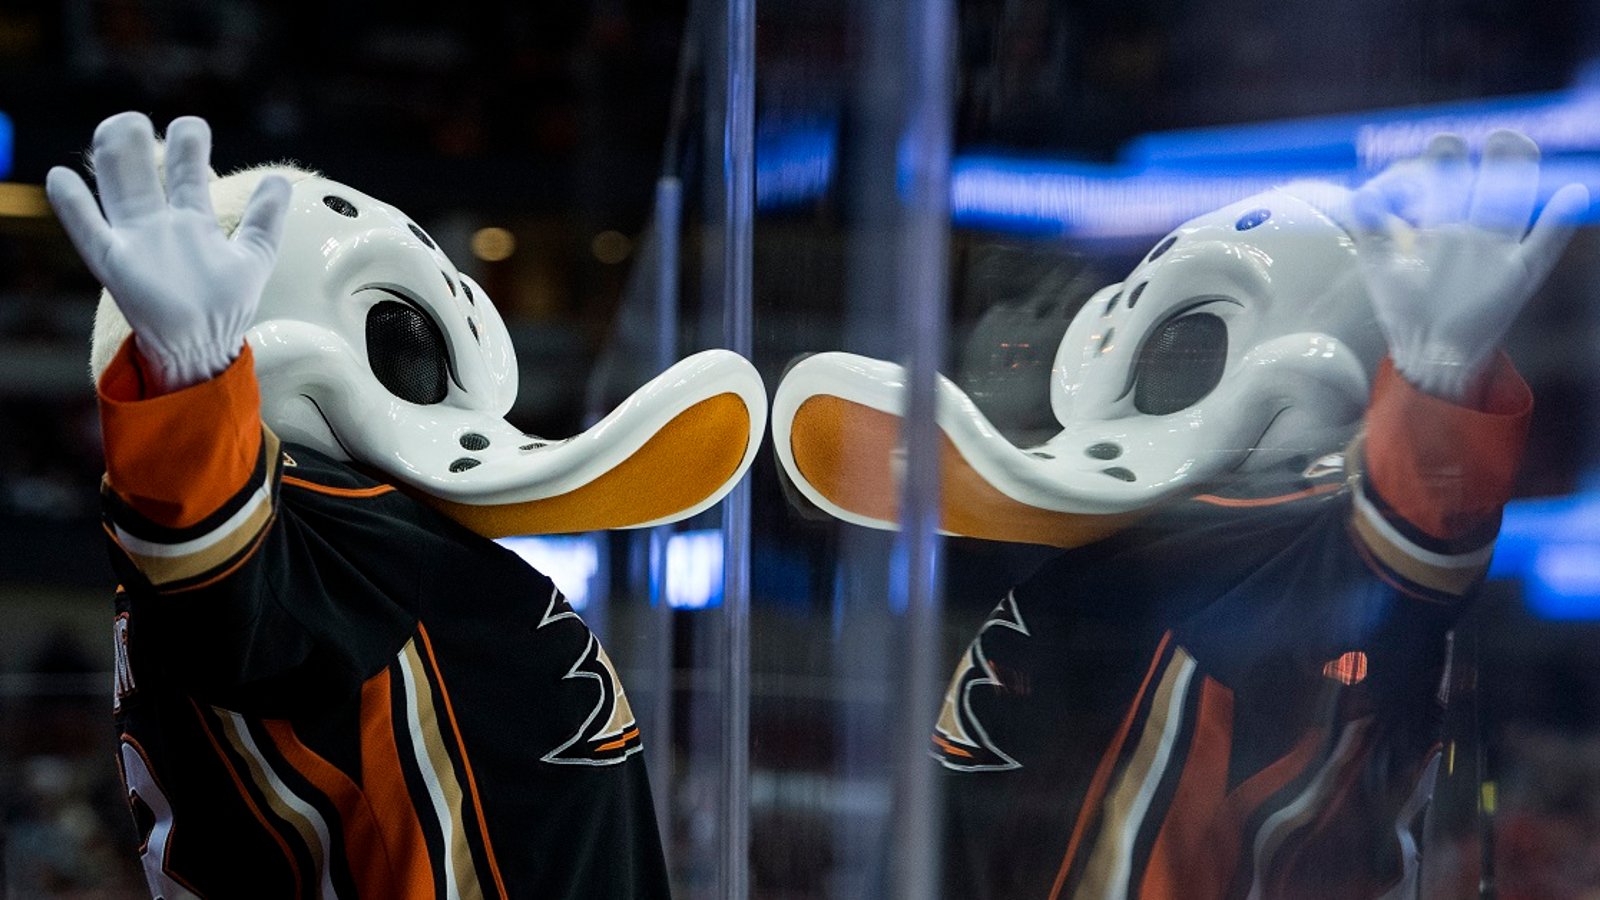 Which NHL Mascot is the best in the NHL?